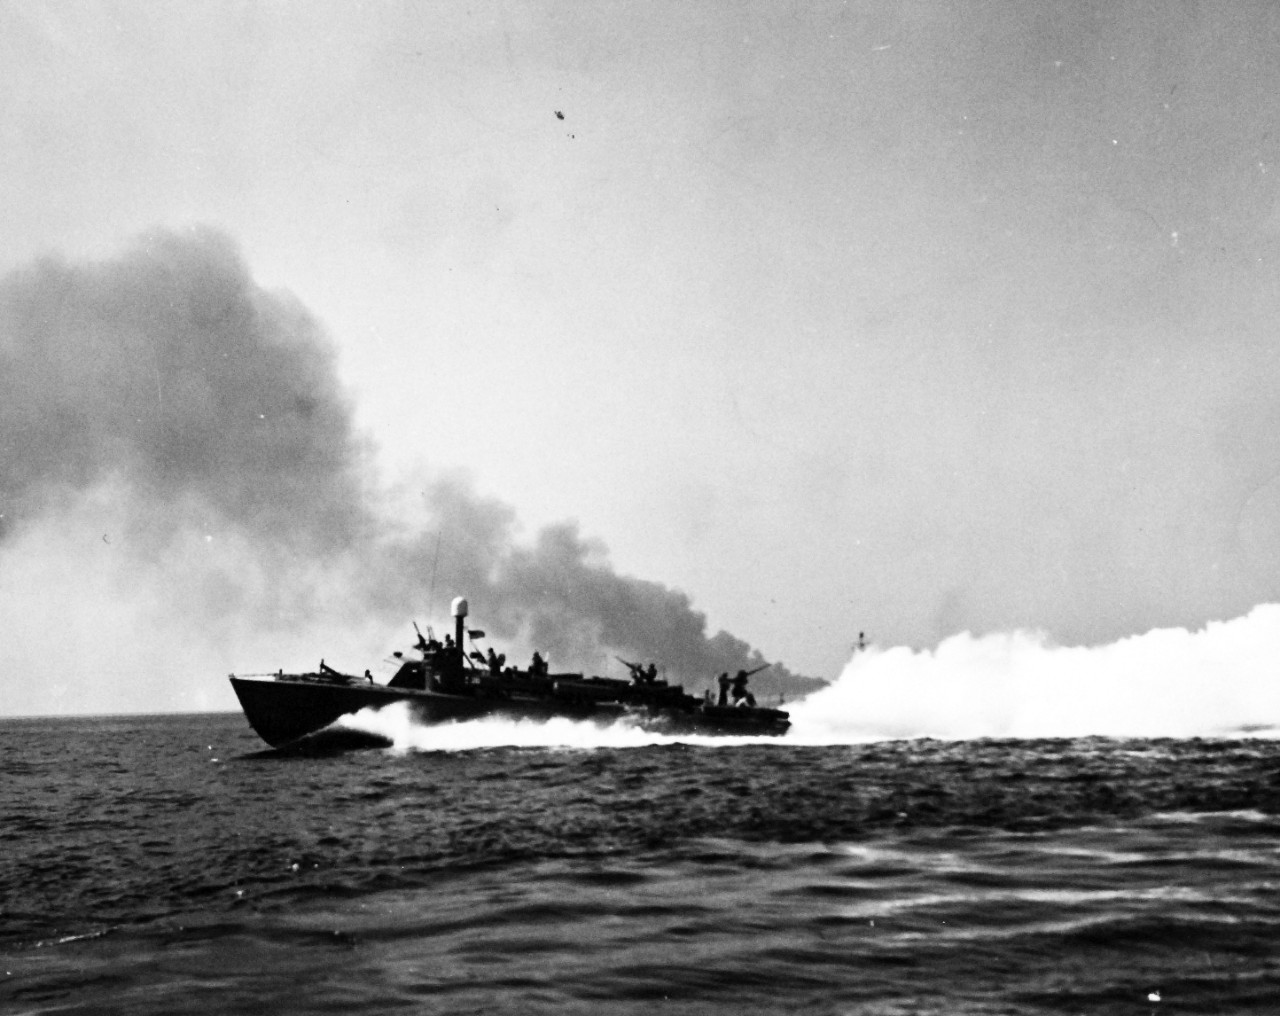 80-G-87326:  Operation Avalanche, September 1943.  PT Boat laying smoke screen around USS Ancon (AGC-4) in the Gulf of Salerno, Italy.  Photograph released September 12, 1943.   U.S. Navy photograph, now in the collections of the National Archives.  (2017/04/04).